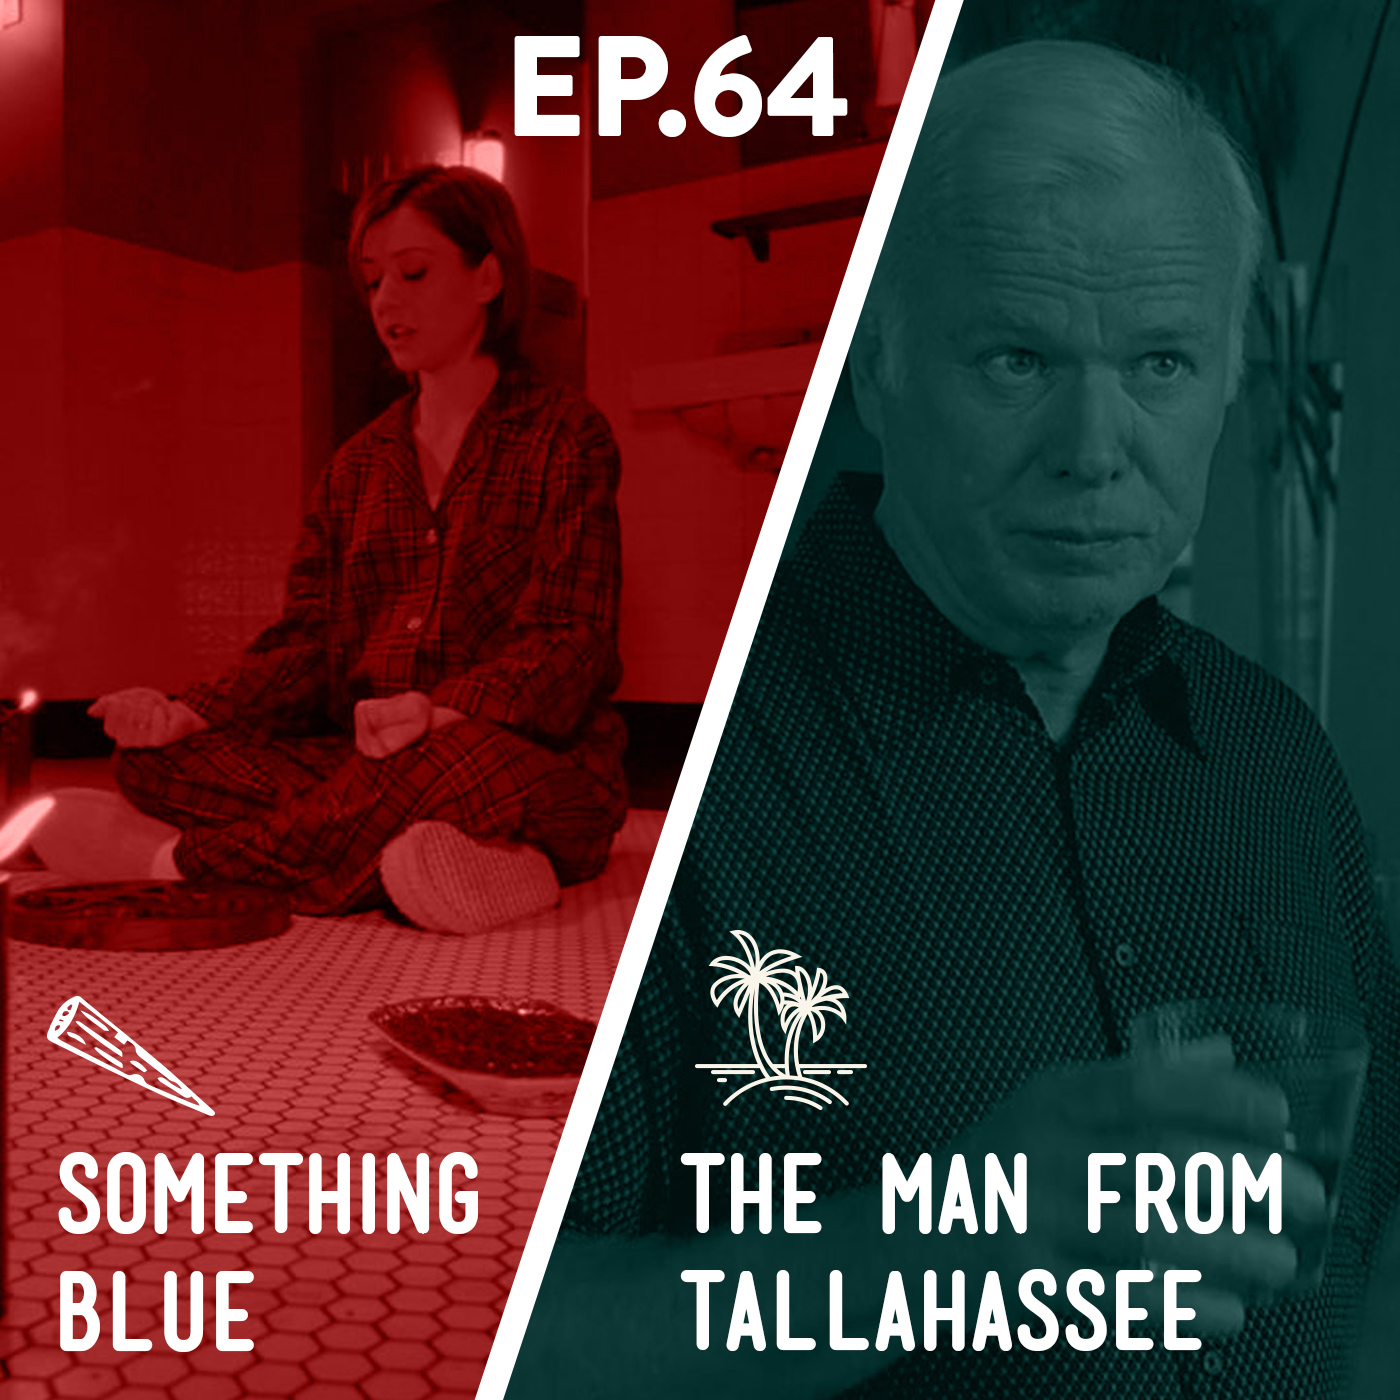 64 - Something Blue / The Man From Tallahassee Image